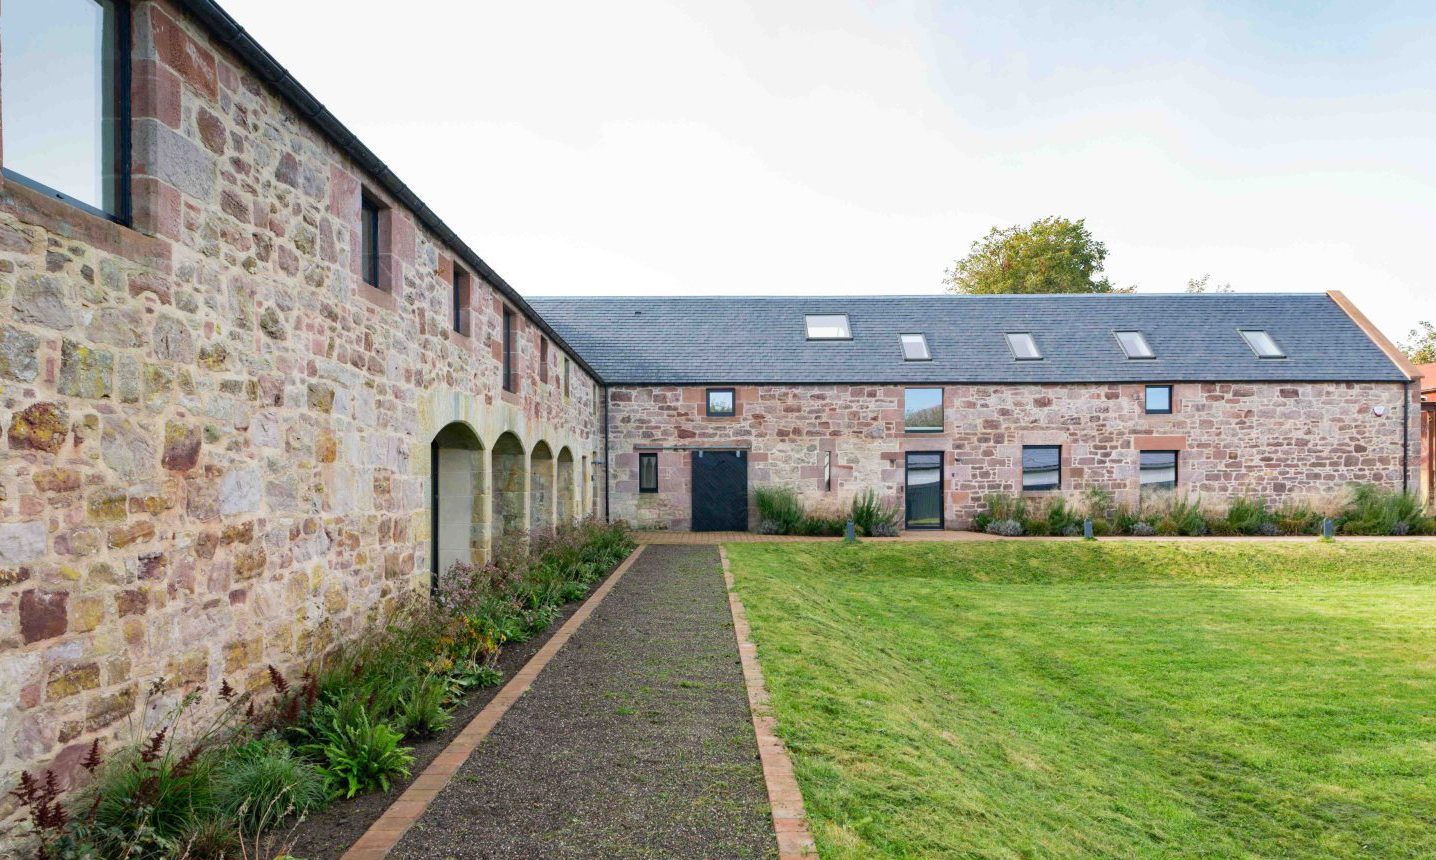 Ruined steading near Loch Leven converted into stunning net zero offices in £850k transformation